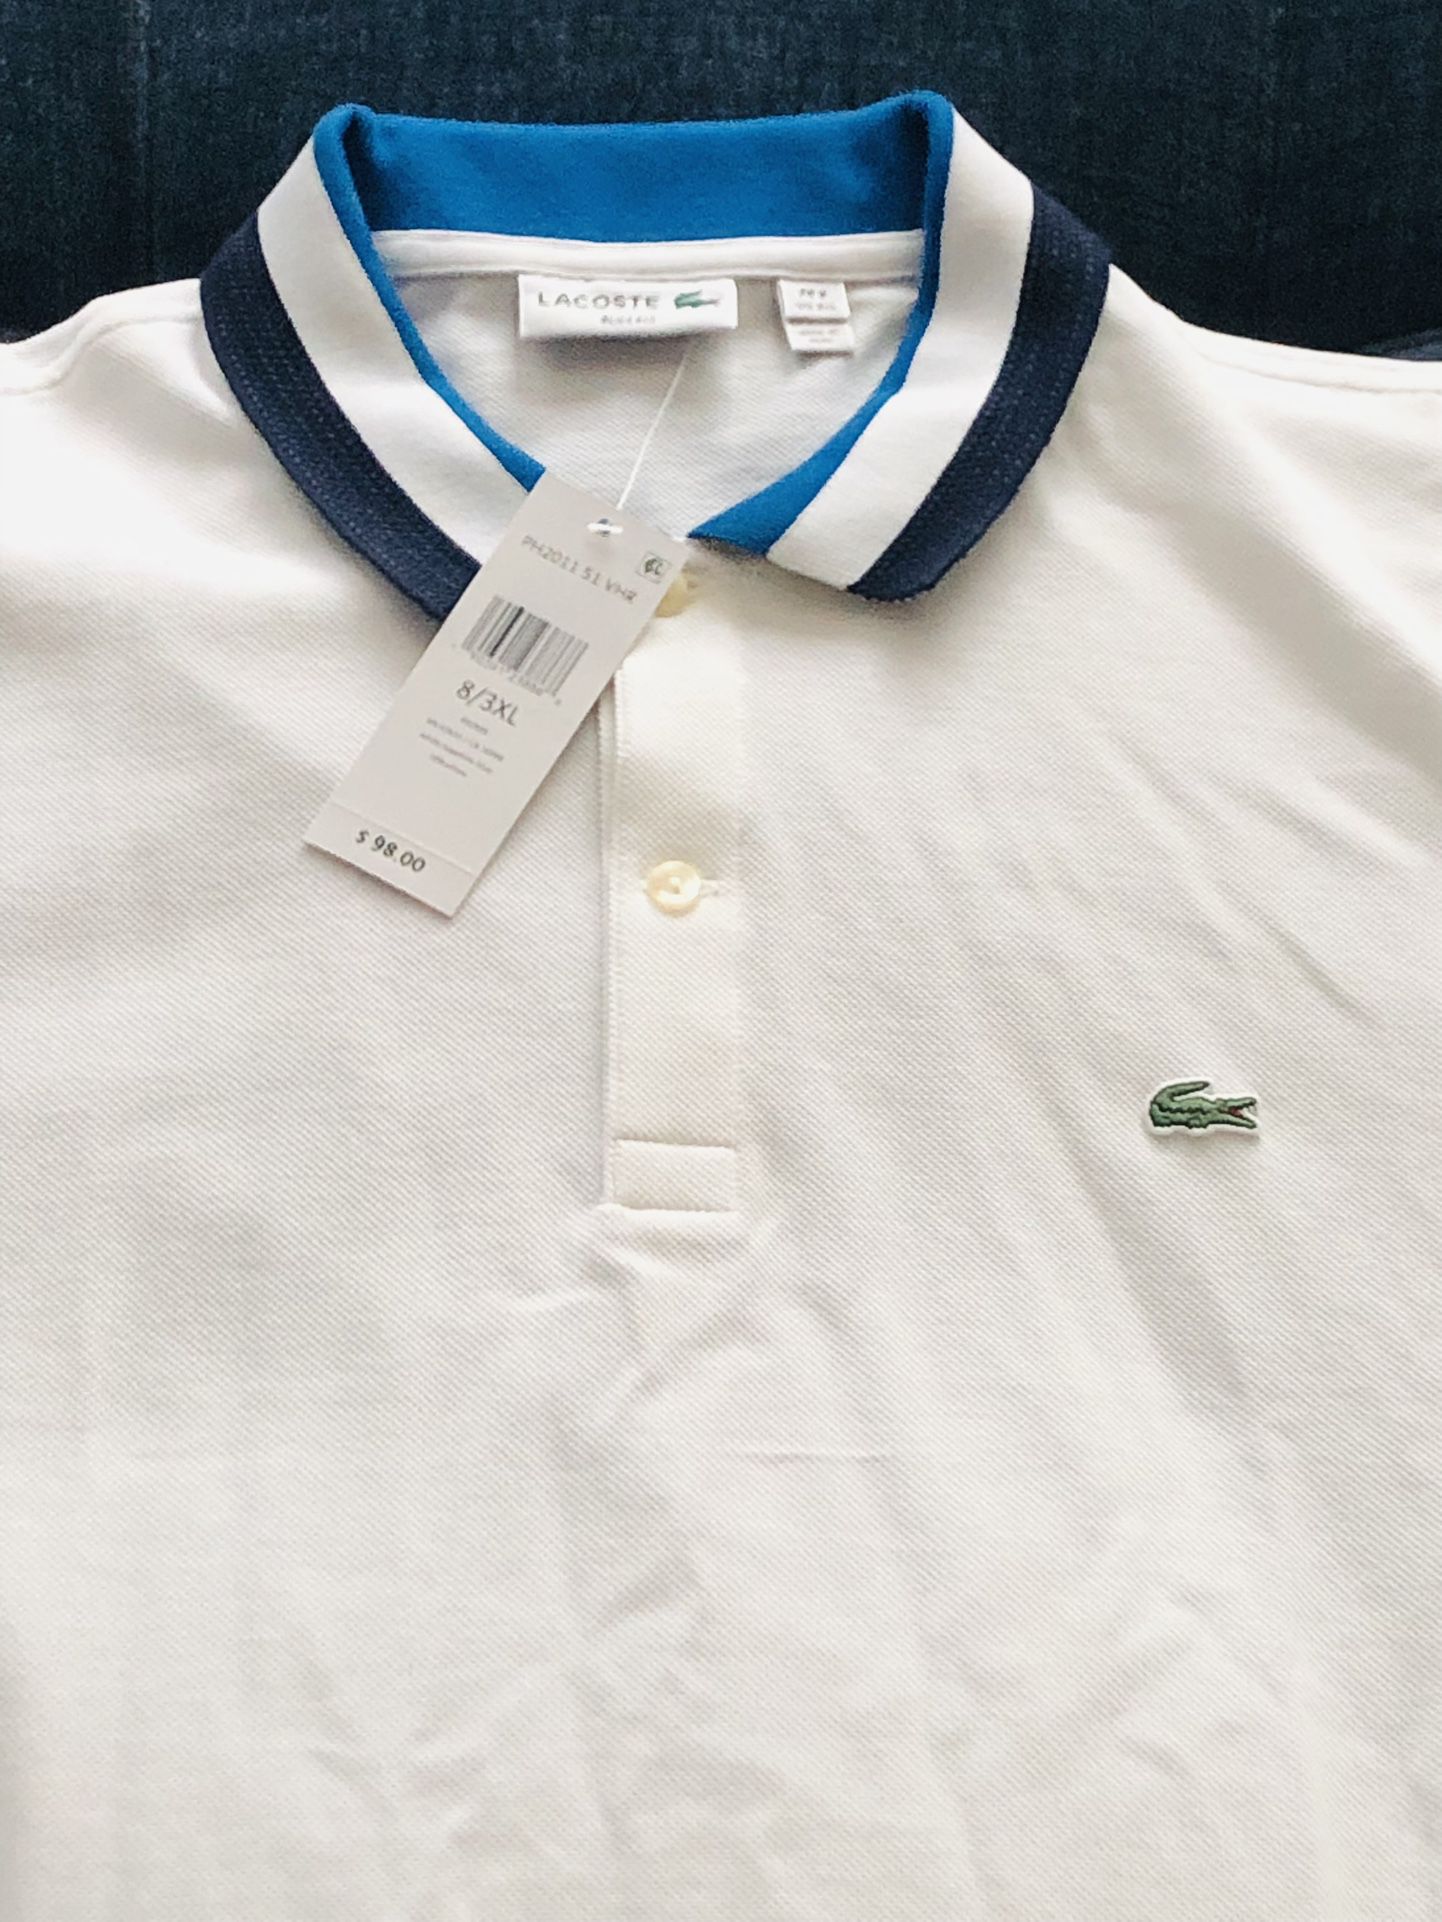 Polo Shirt Mens Size 3XL/8 White Blue Trim Slim Fit Short Sleeve for Sale in Chicago, IL - OfferUp